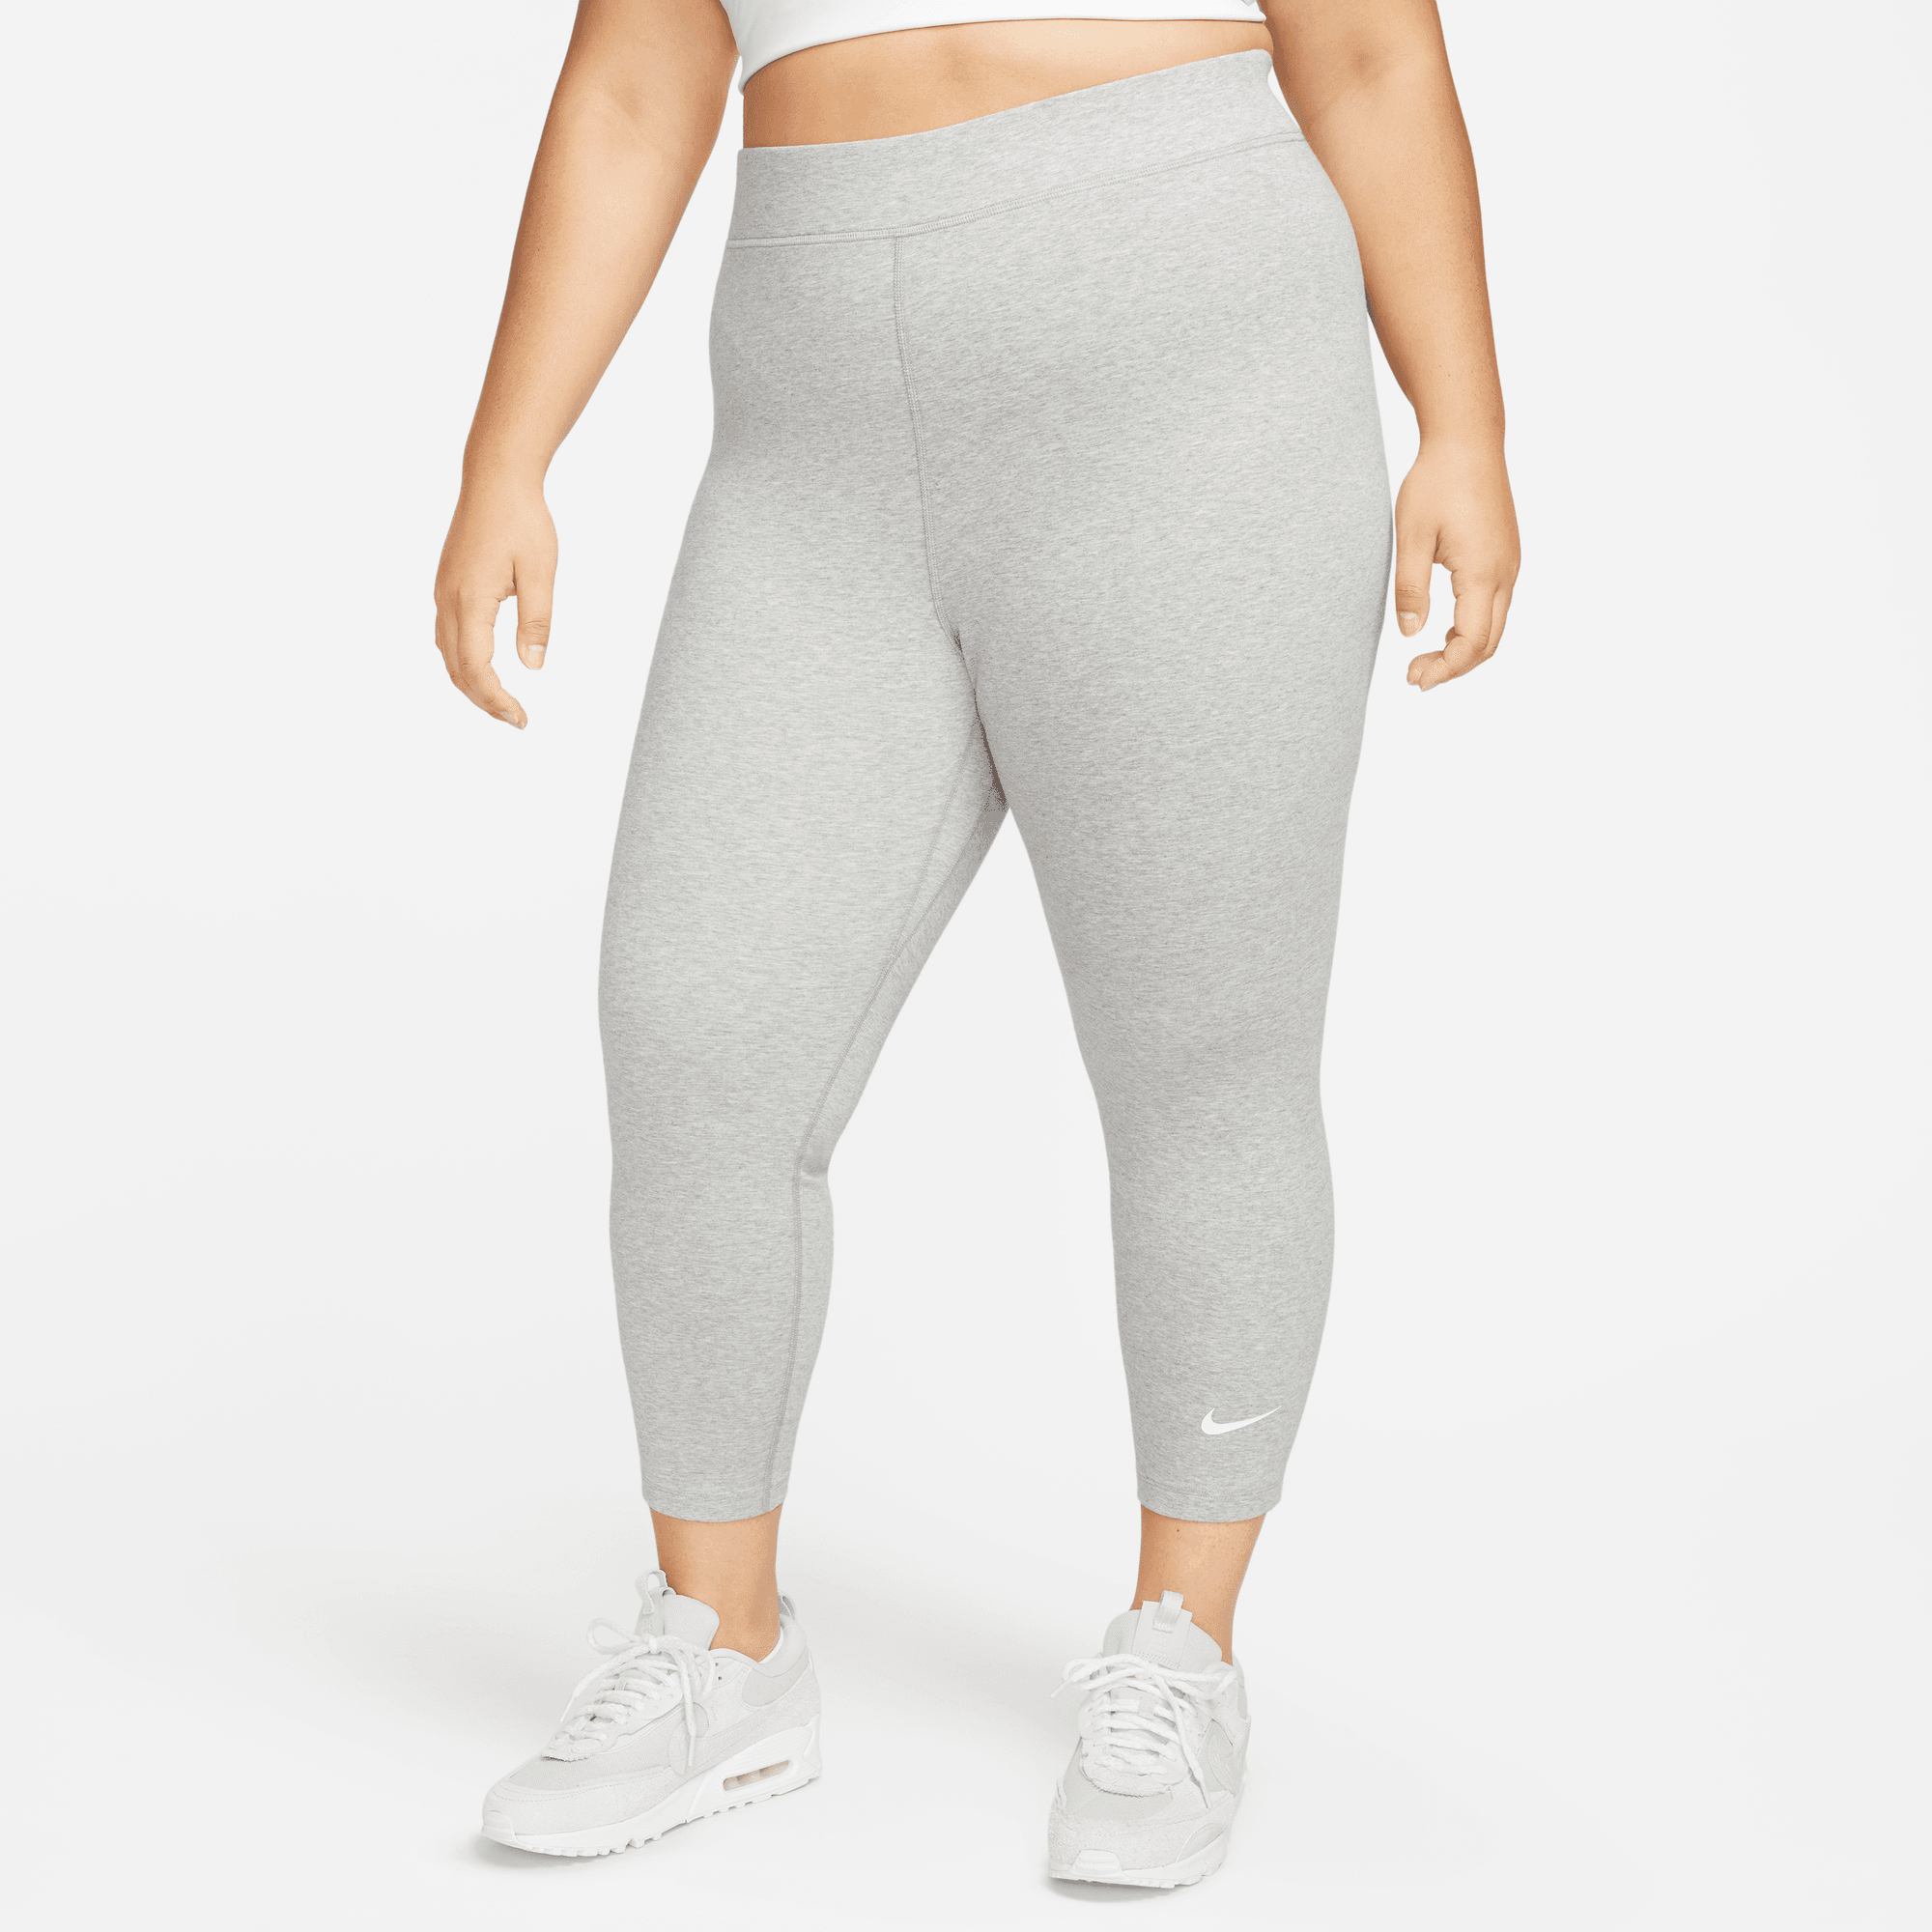 Park – Ph Outlet GREY DK HEATHER/SAIL LBR TIGHT 7/8 HR W NSW CLSC NK